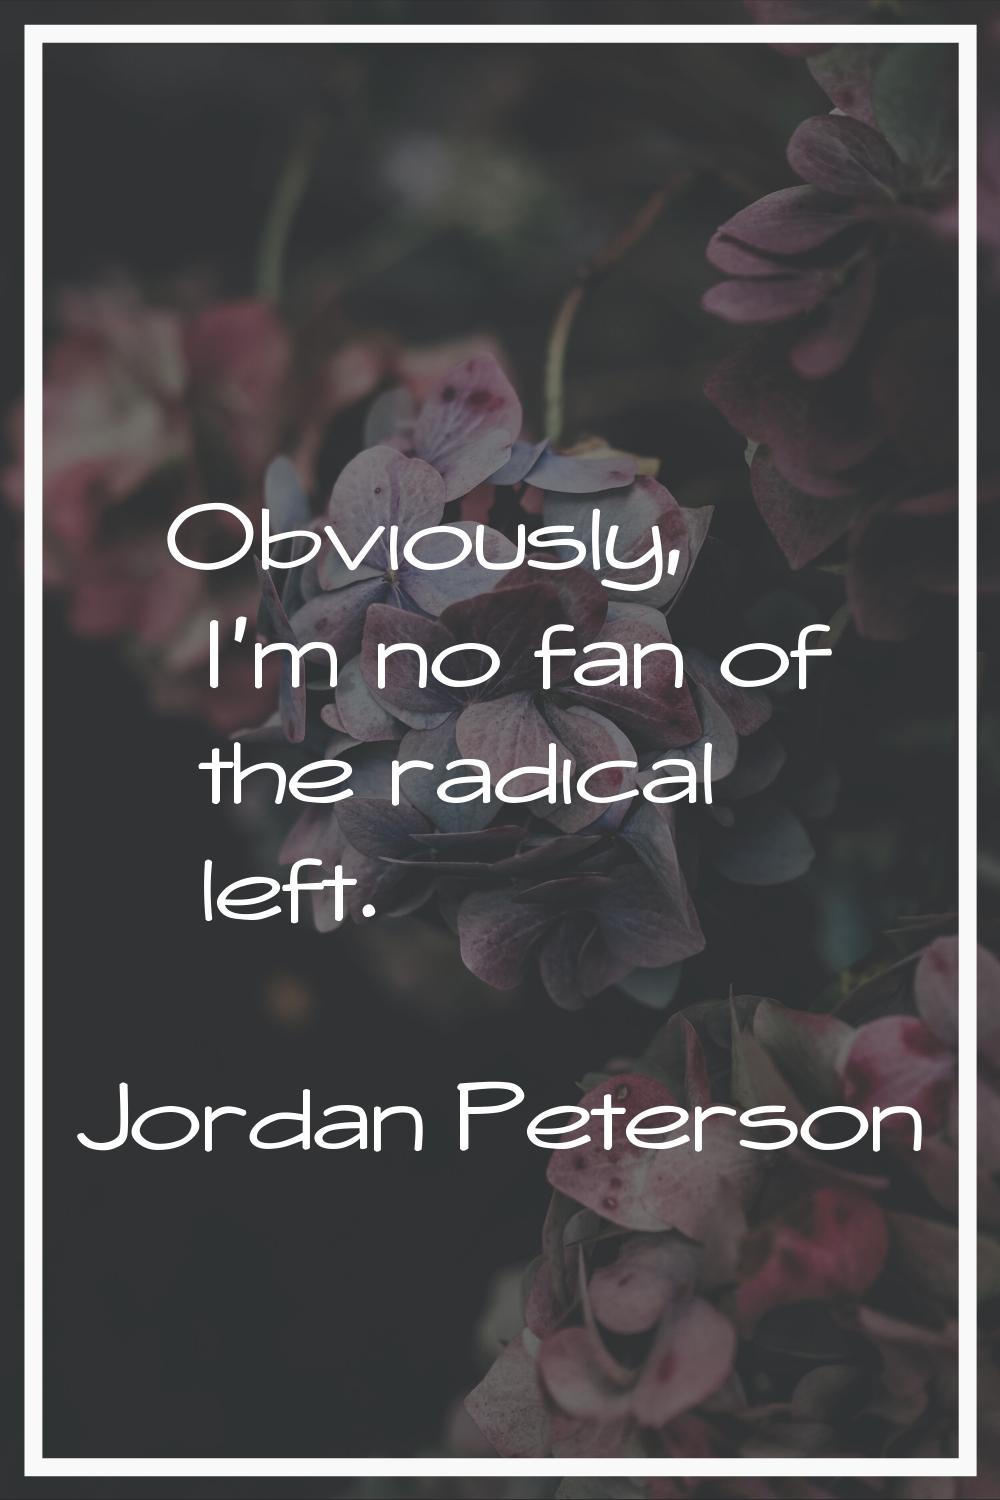 Obviously, I'm no fan of the radical left.